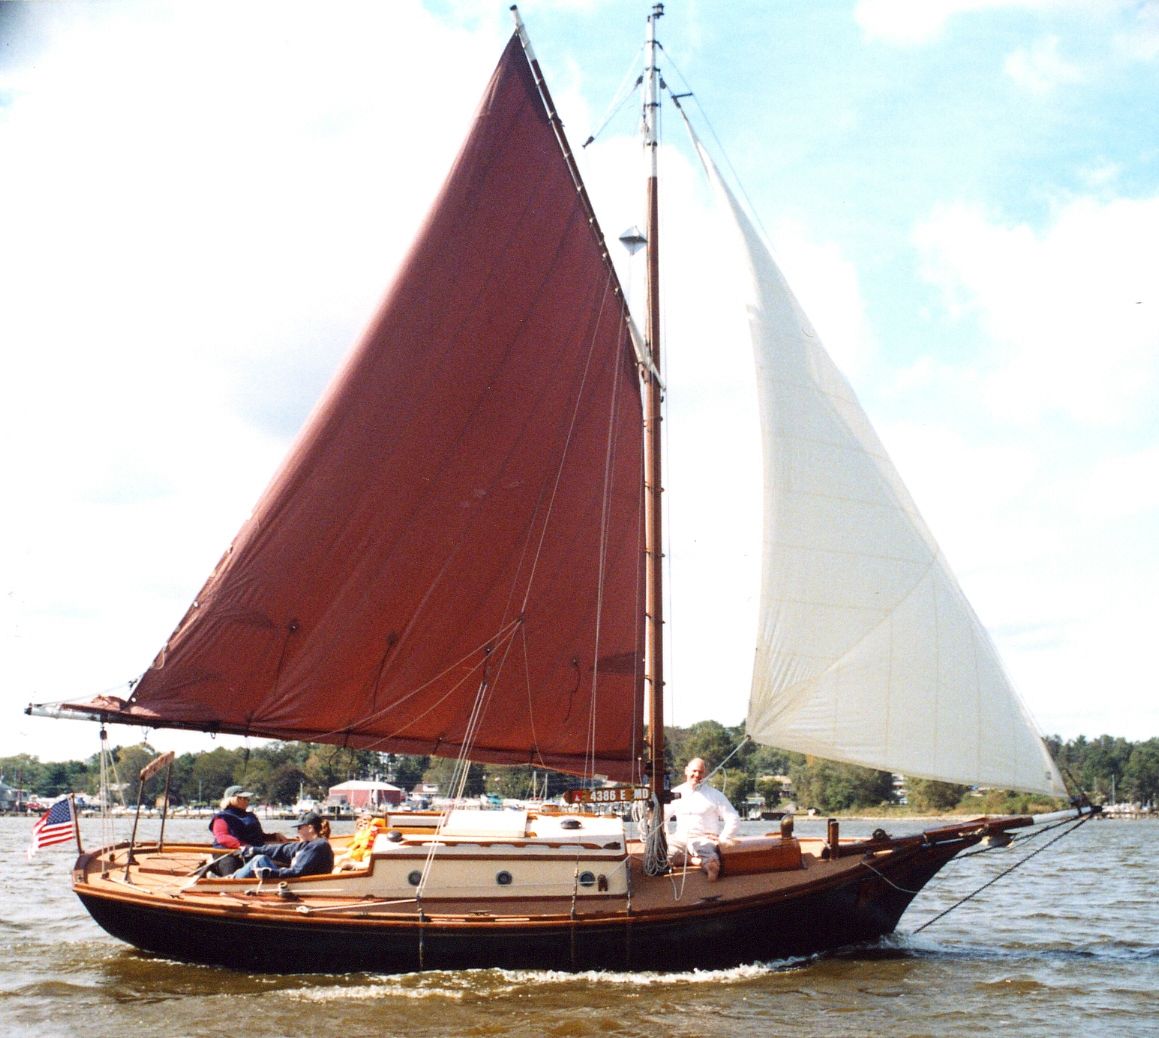 atkins - ladyben classic wooden boats for sale